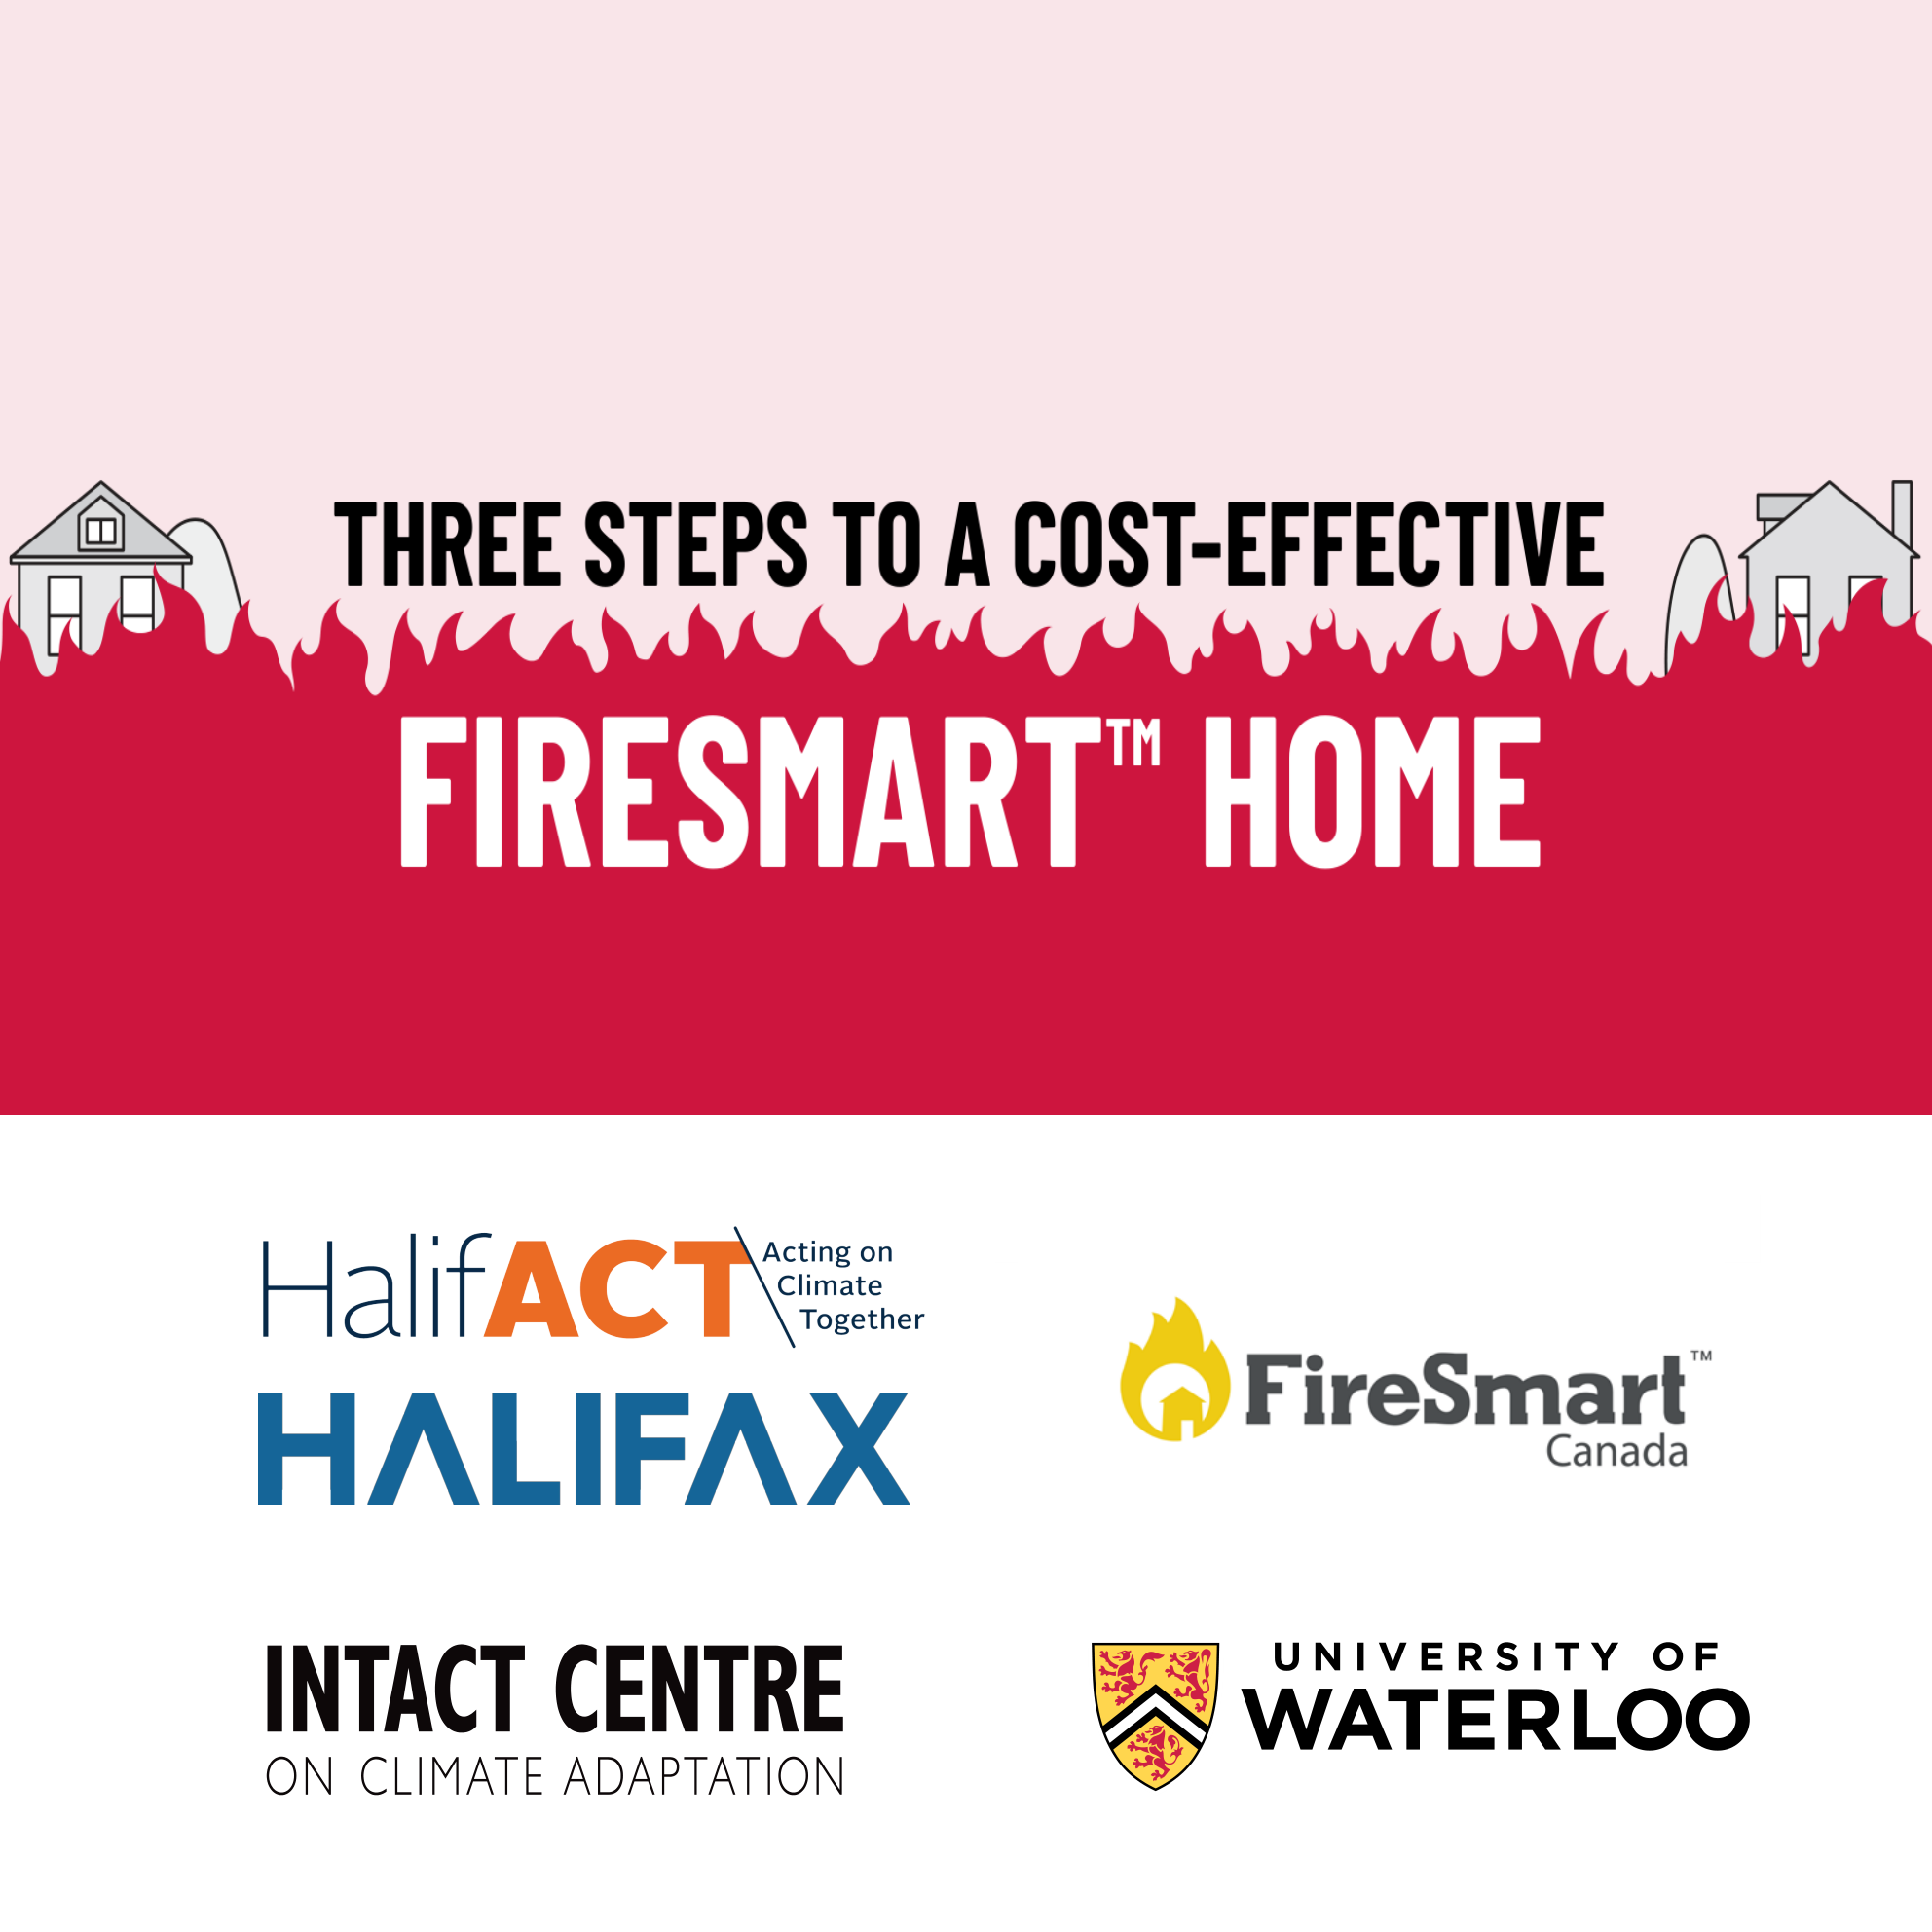 Three Steps to a Cost-Effective Firesmart Home graphic